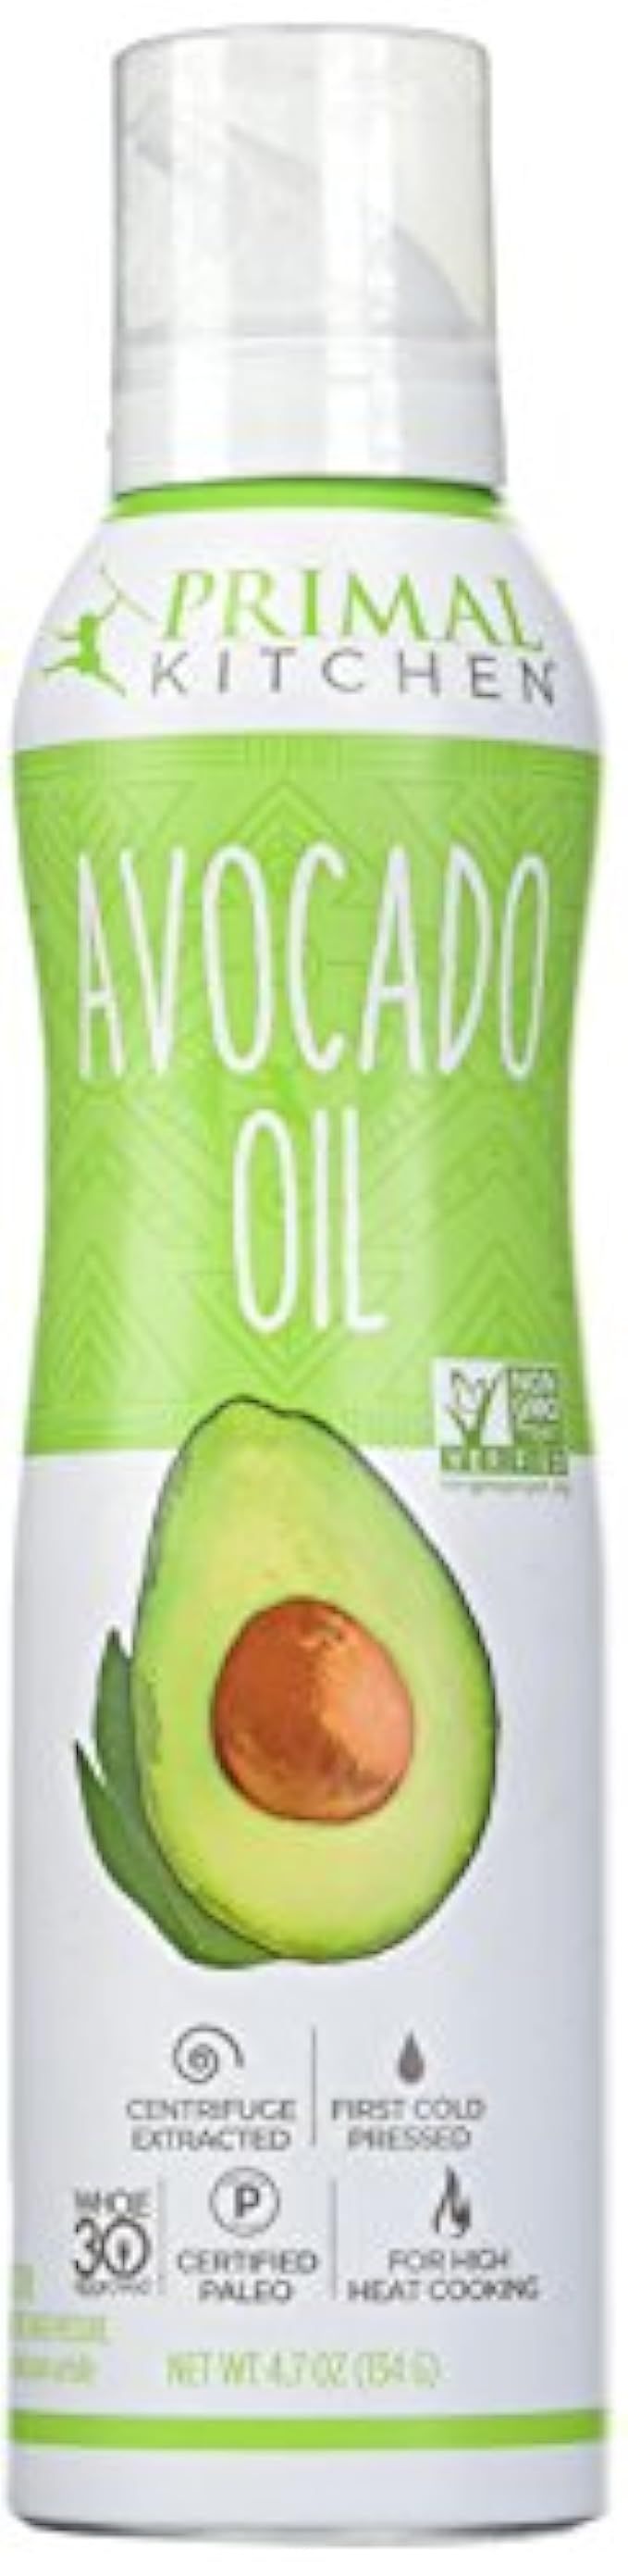 Primal Kitchen Avocado Oil Spray, Whole 30 Approved & Cold Pressed, 1 Can - 4.7 Ounce | Amazon (US)